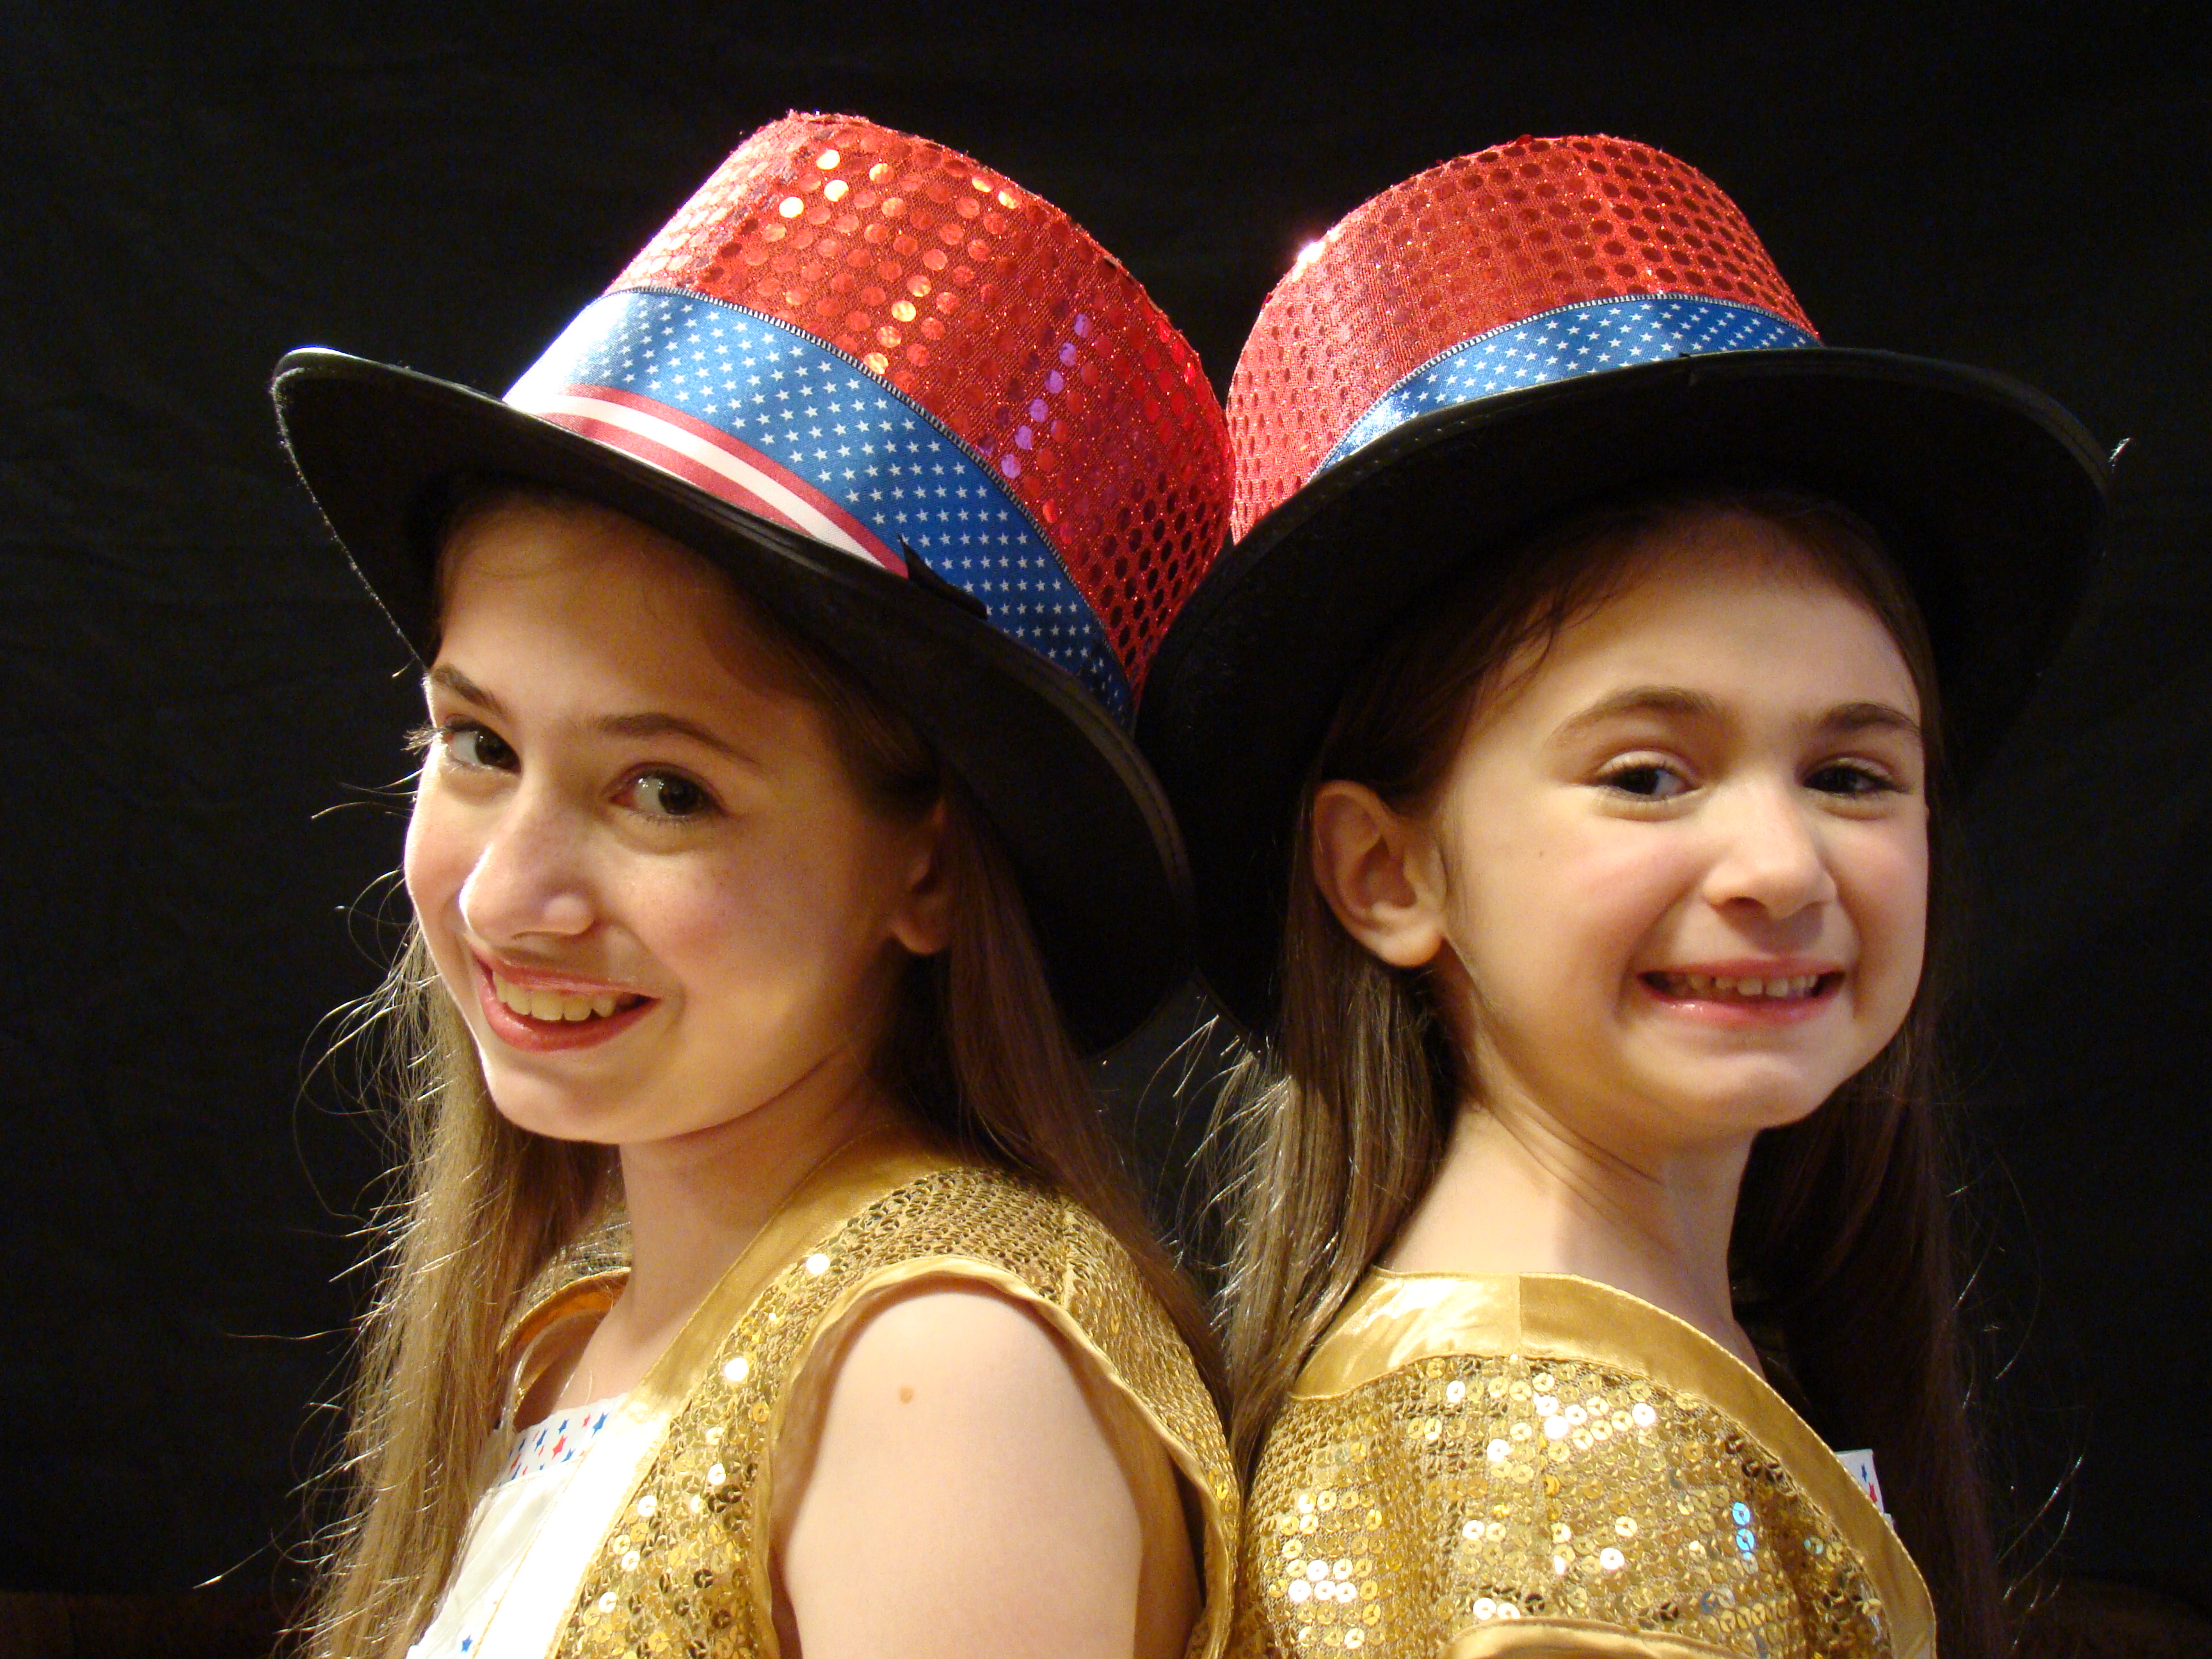 Brigid and sister Shannon promo photo for America's Got Talent performance at The Hammerstein Ballroom NYC